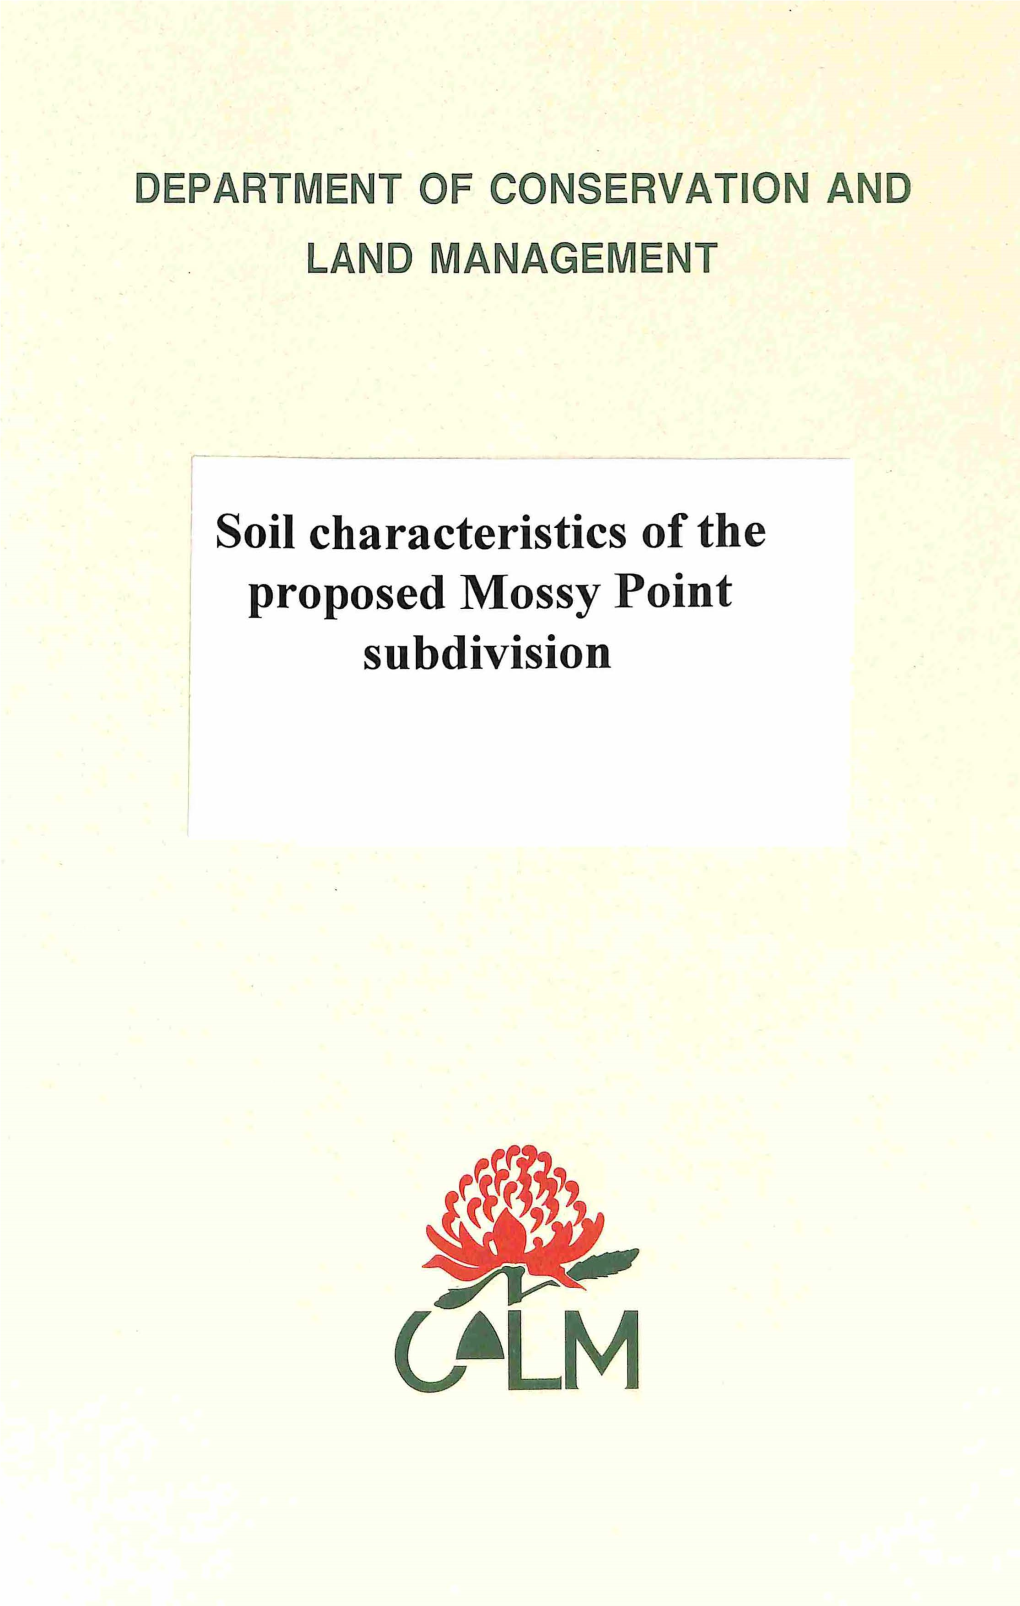 Soil Characteristics of the Proposed Mossy Point Subdivision